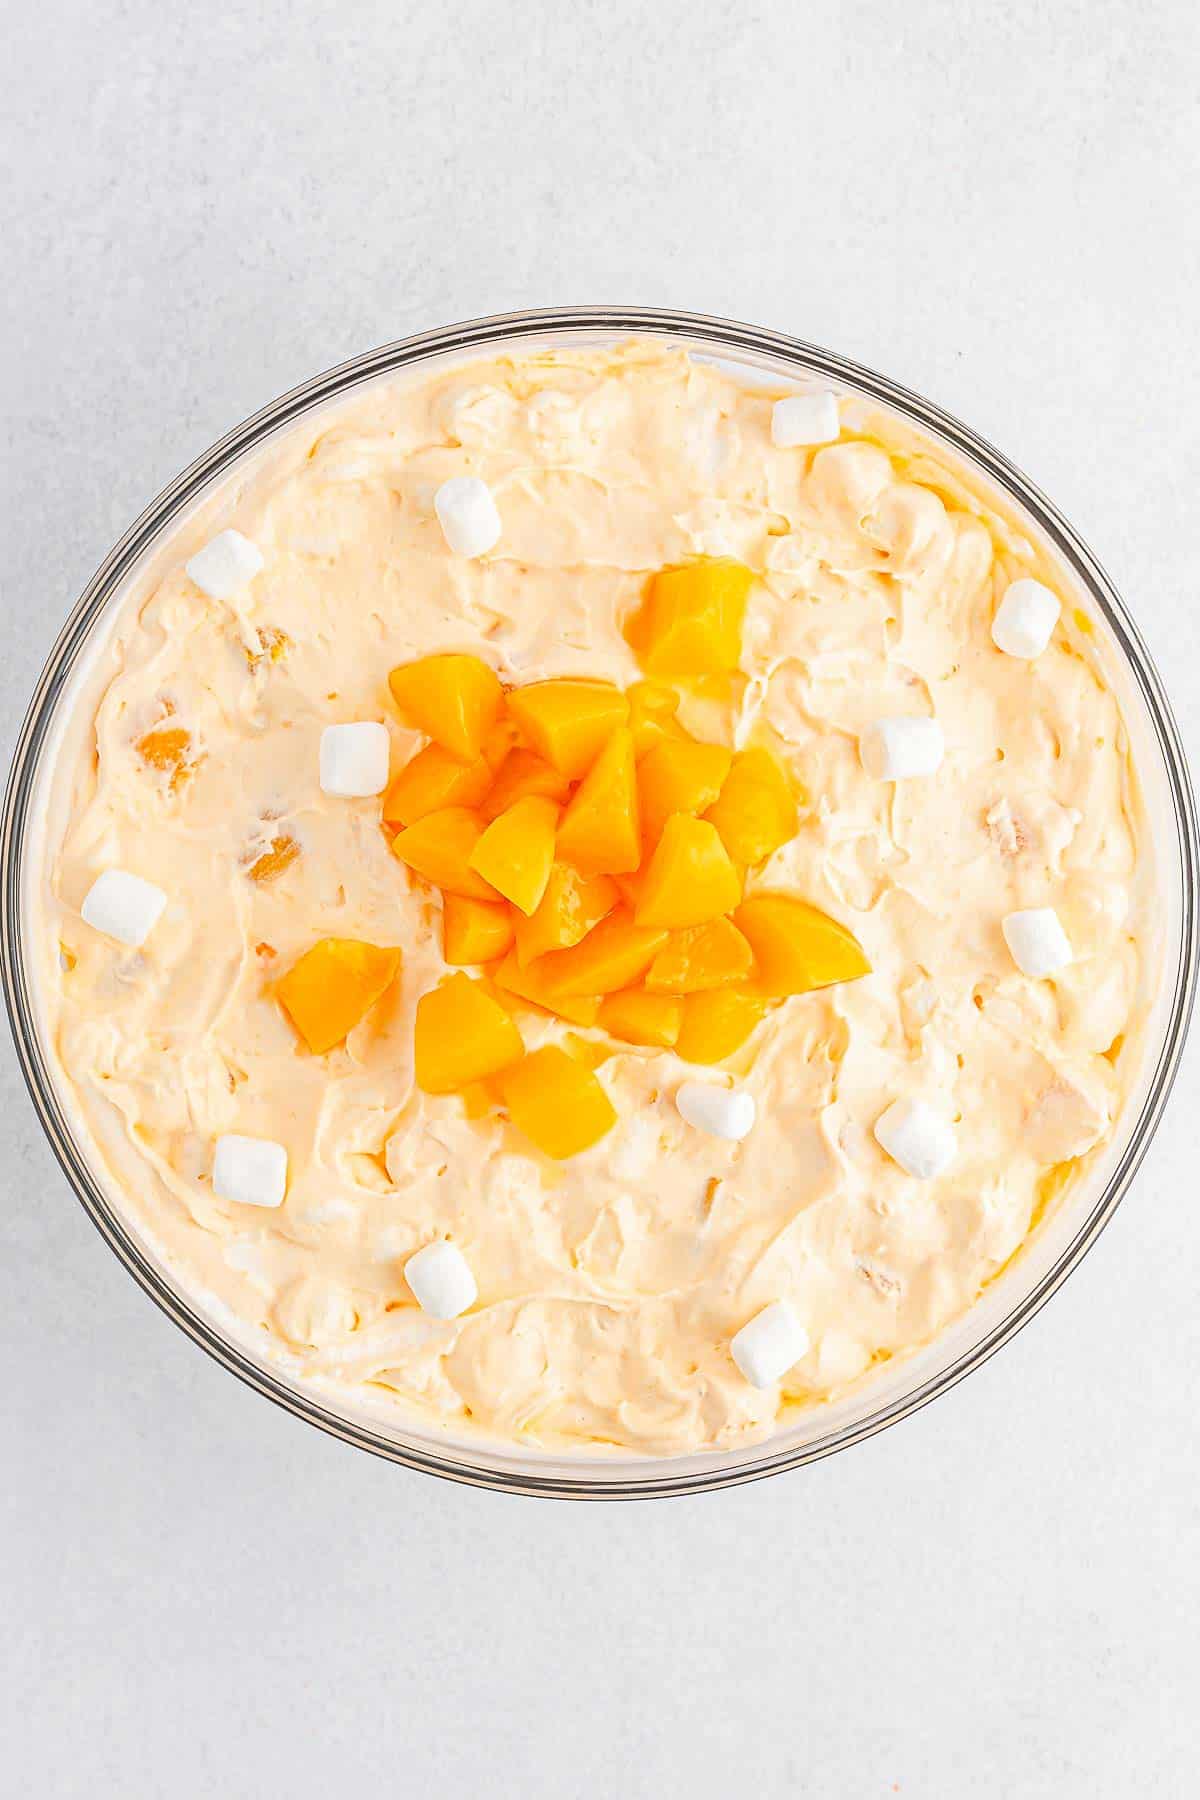 Large glass mixing bowl of Peach Fluff with peaches and marshmallows.